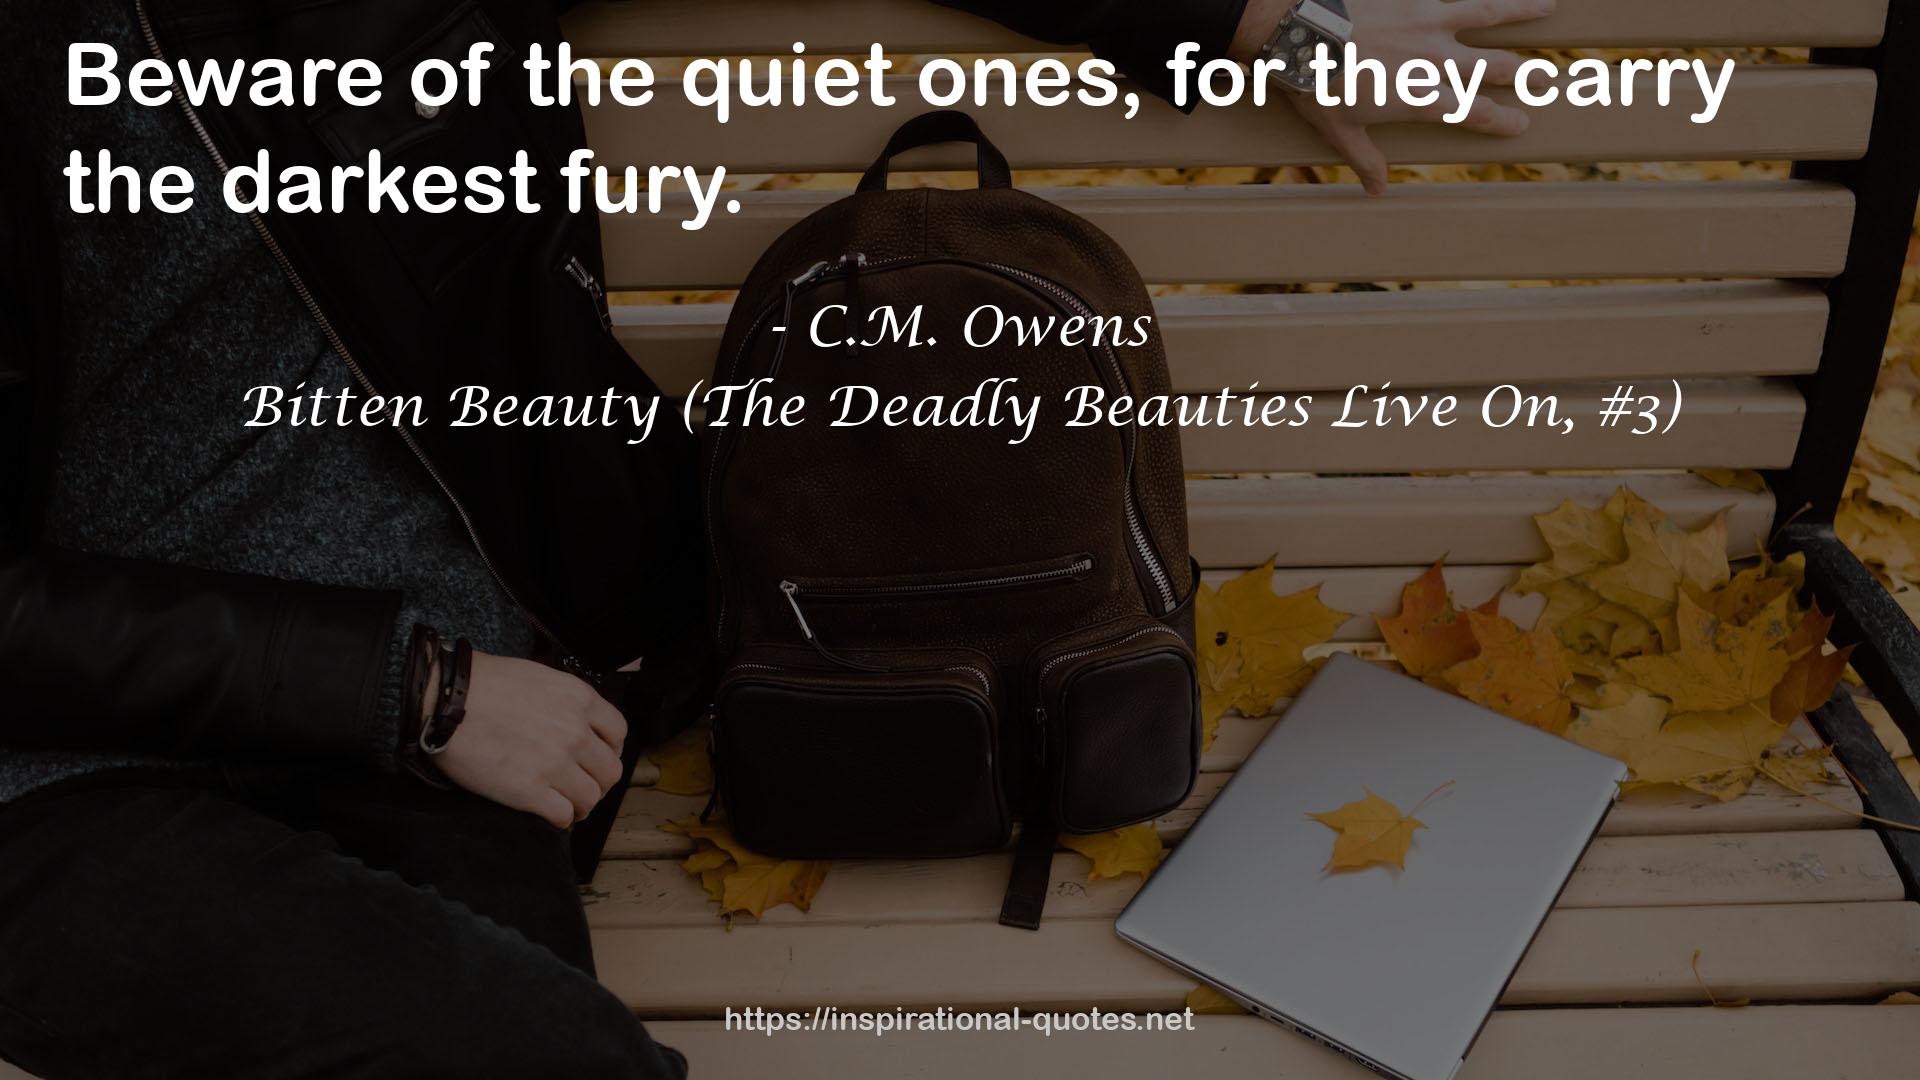 Bitten Beauty (The Deadly Beauties Live On, #3) QUOTES